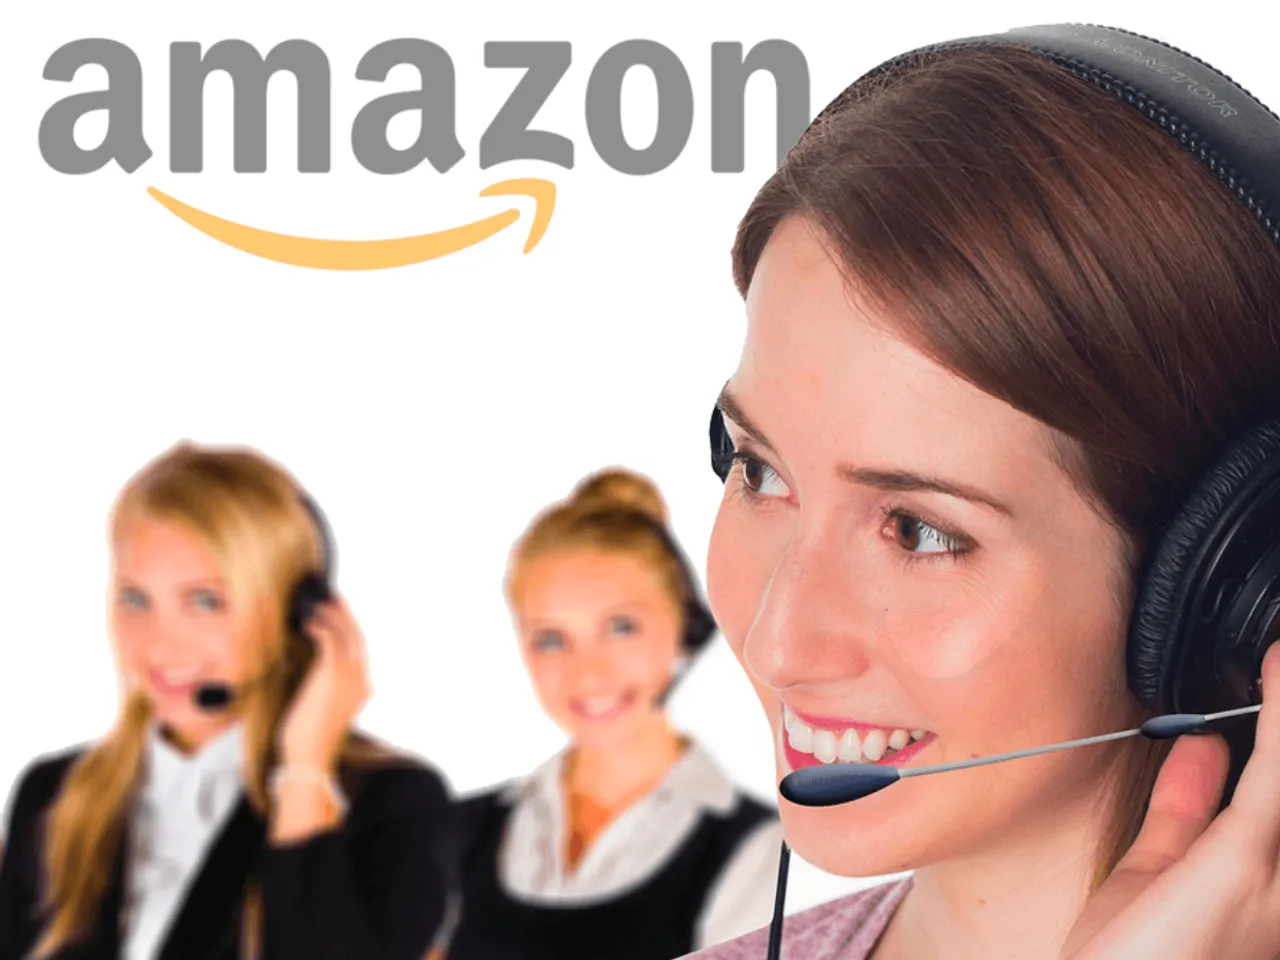 How to Contact Amazon to Resolve Any Issue